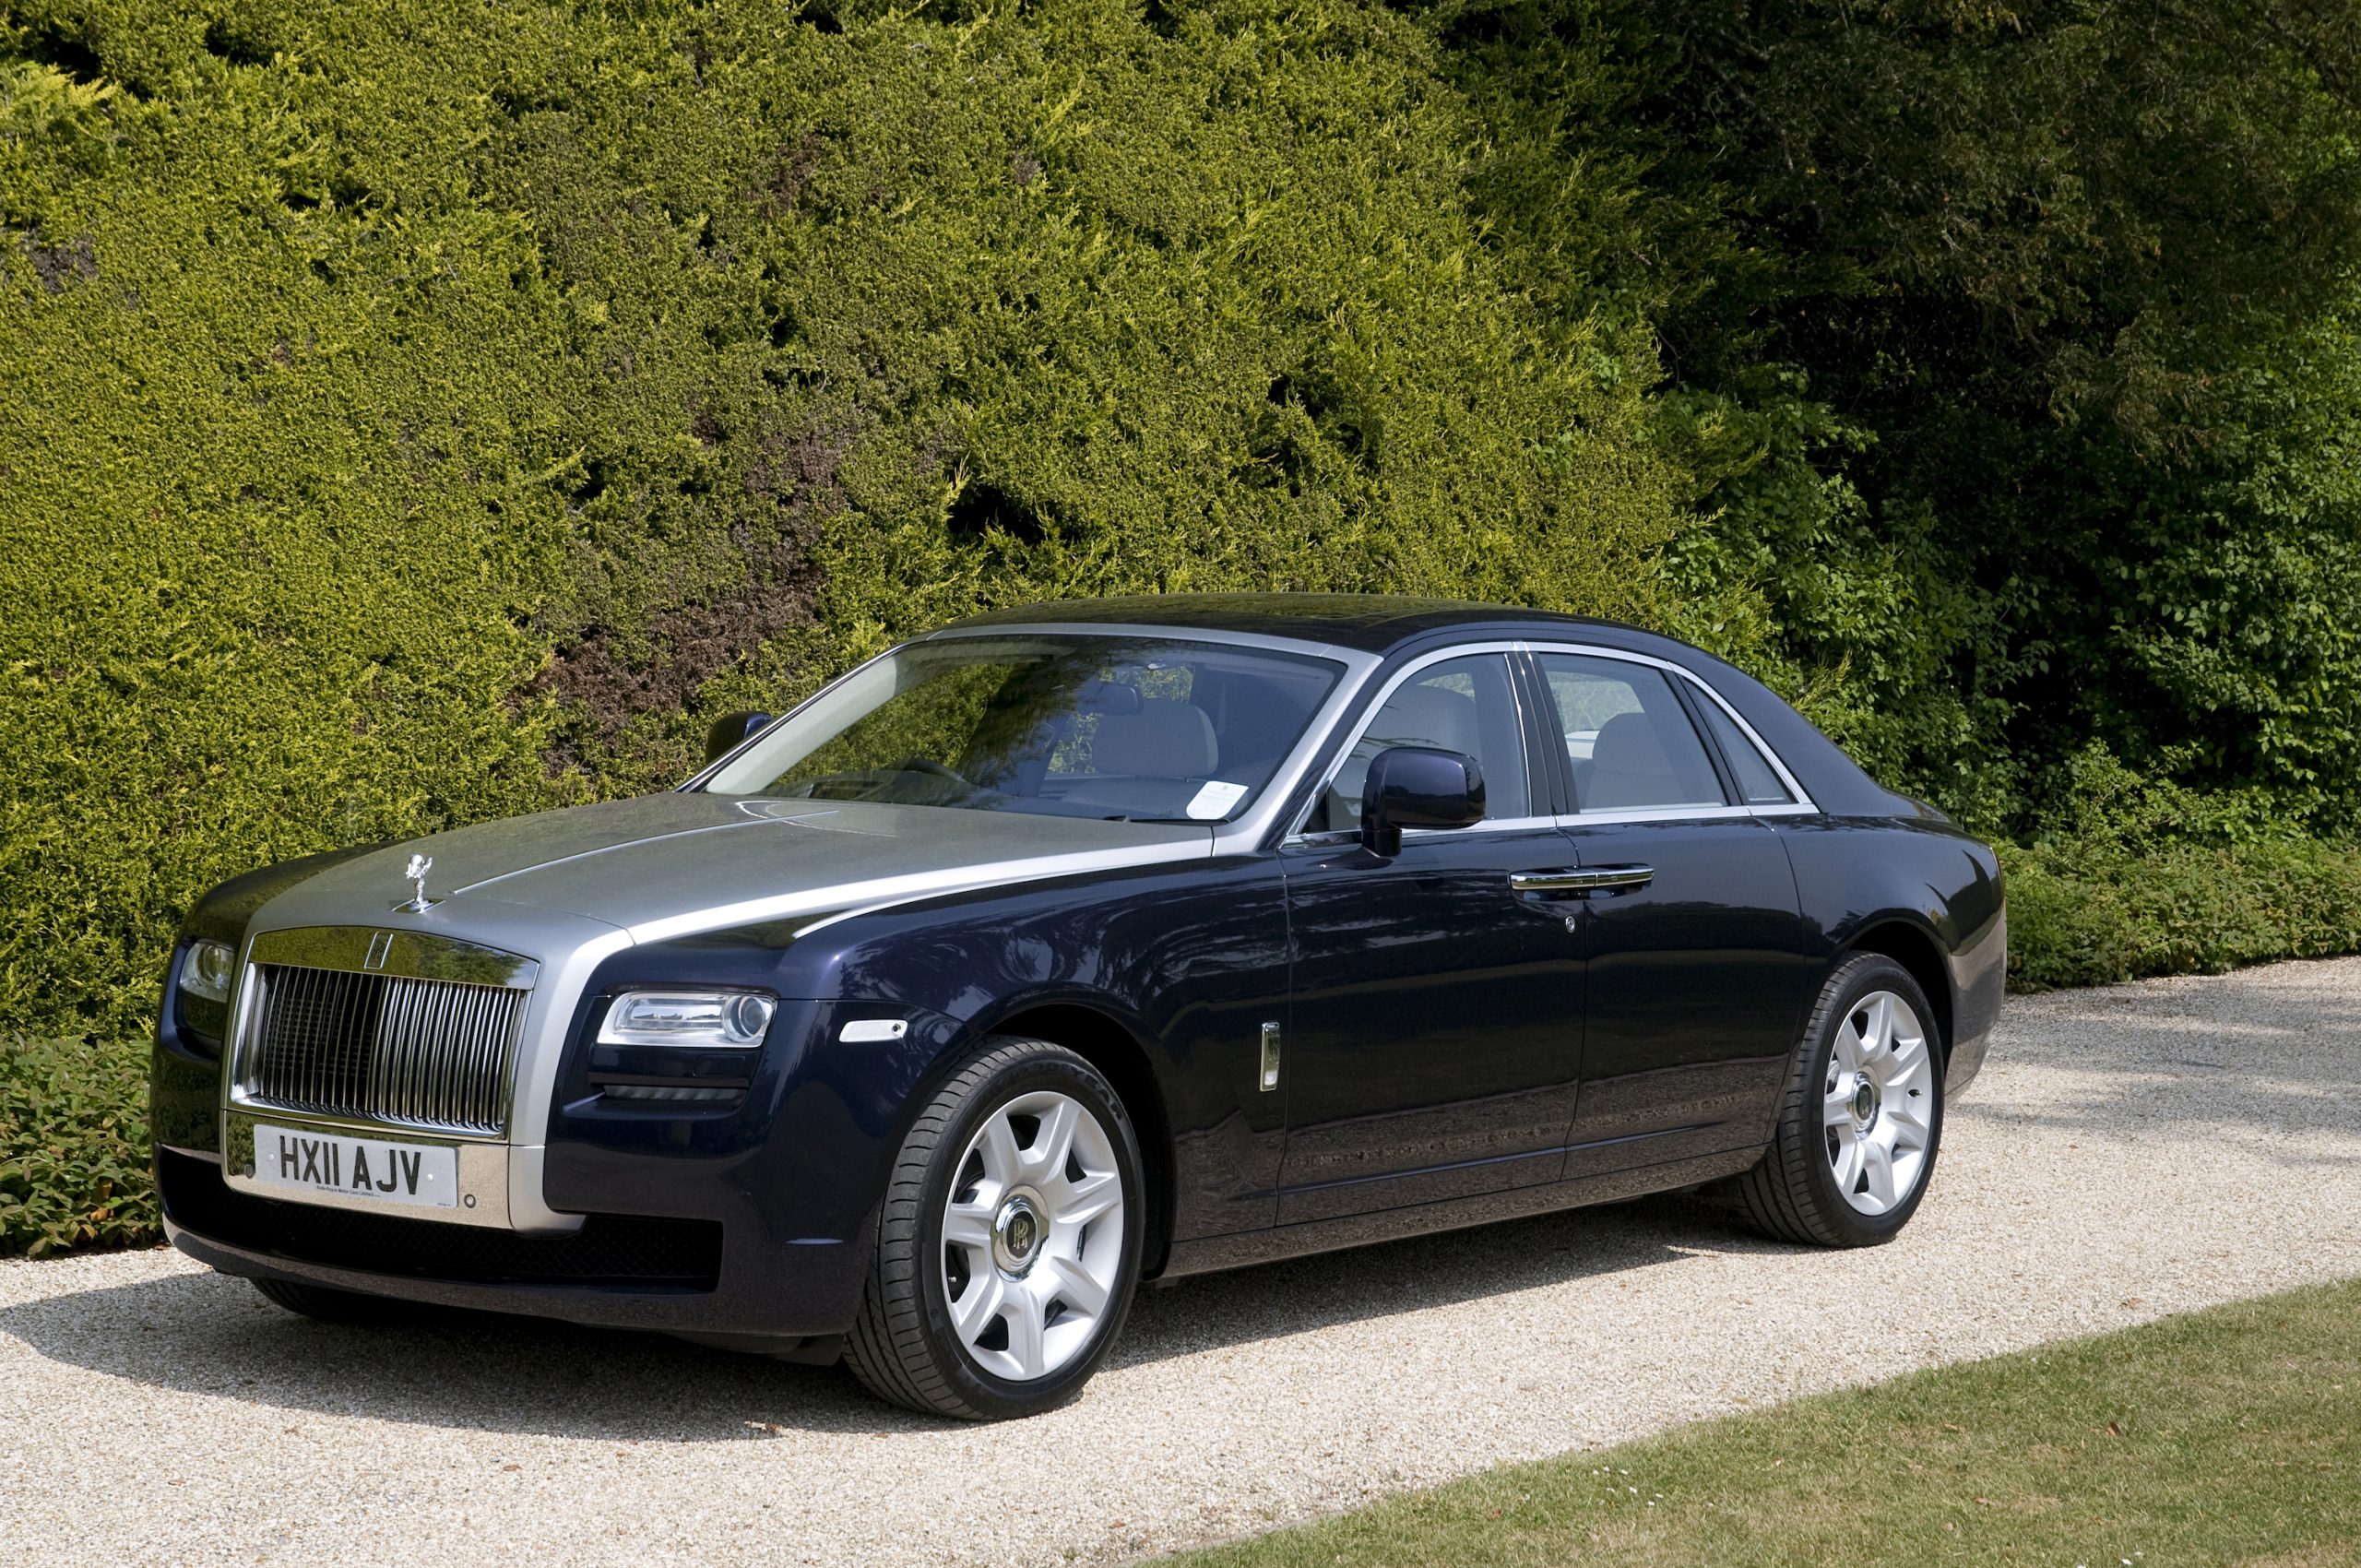 A black and silver Rolls-Royce Ghost luxury sedan parked in front of a tall hedge